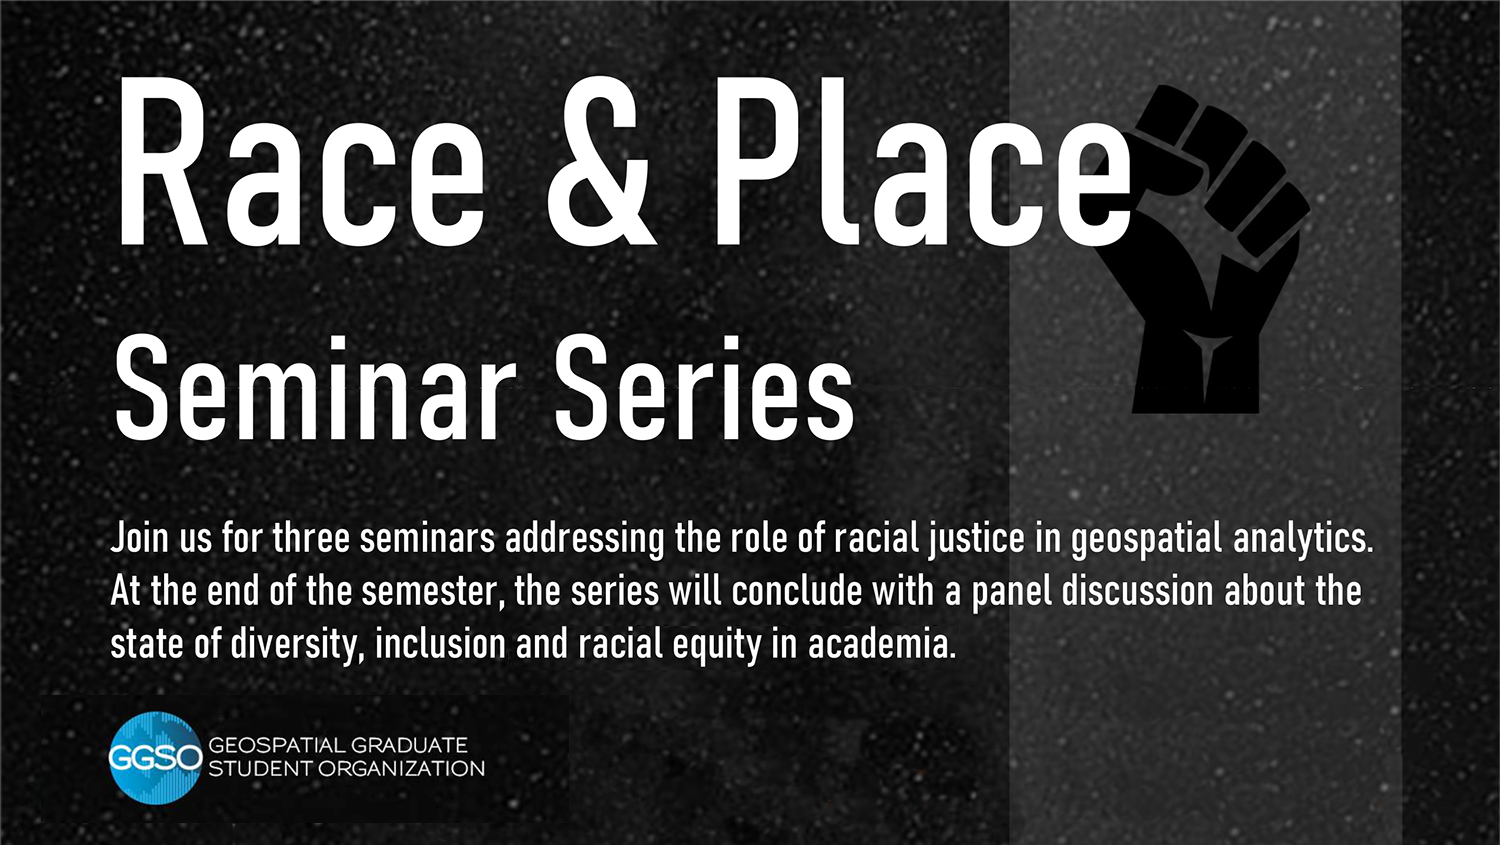 Join us for three seminars addressing the role of racial justice in geospatial analytics. At the end of the semester, the series will conclude with a panel discussion about the state of diversity, inclusion, and racial equity in academia.